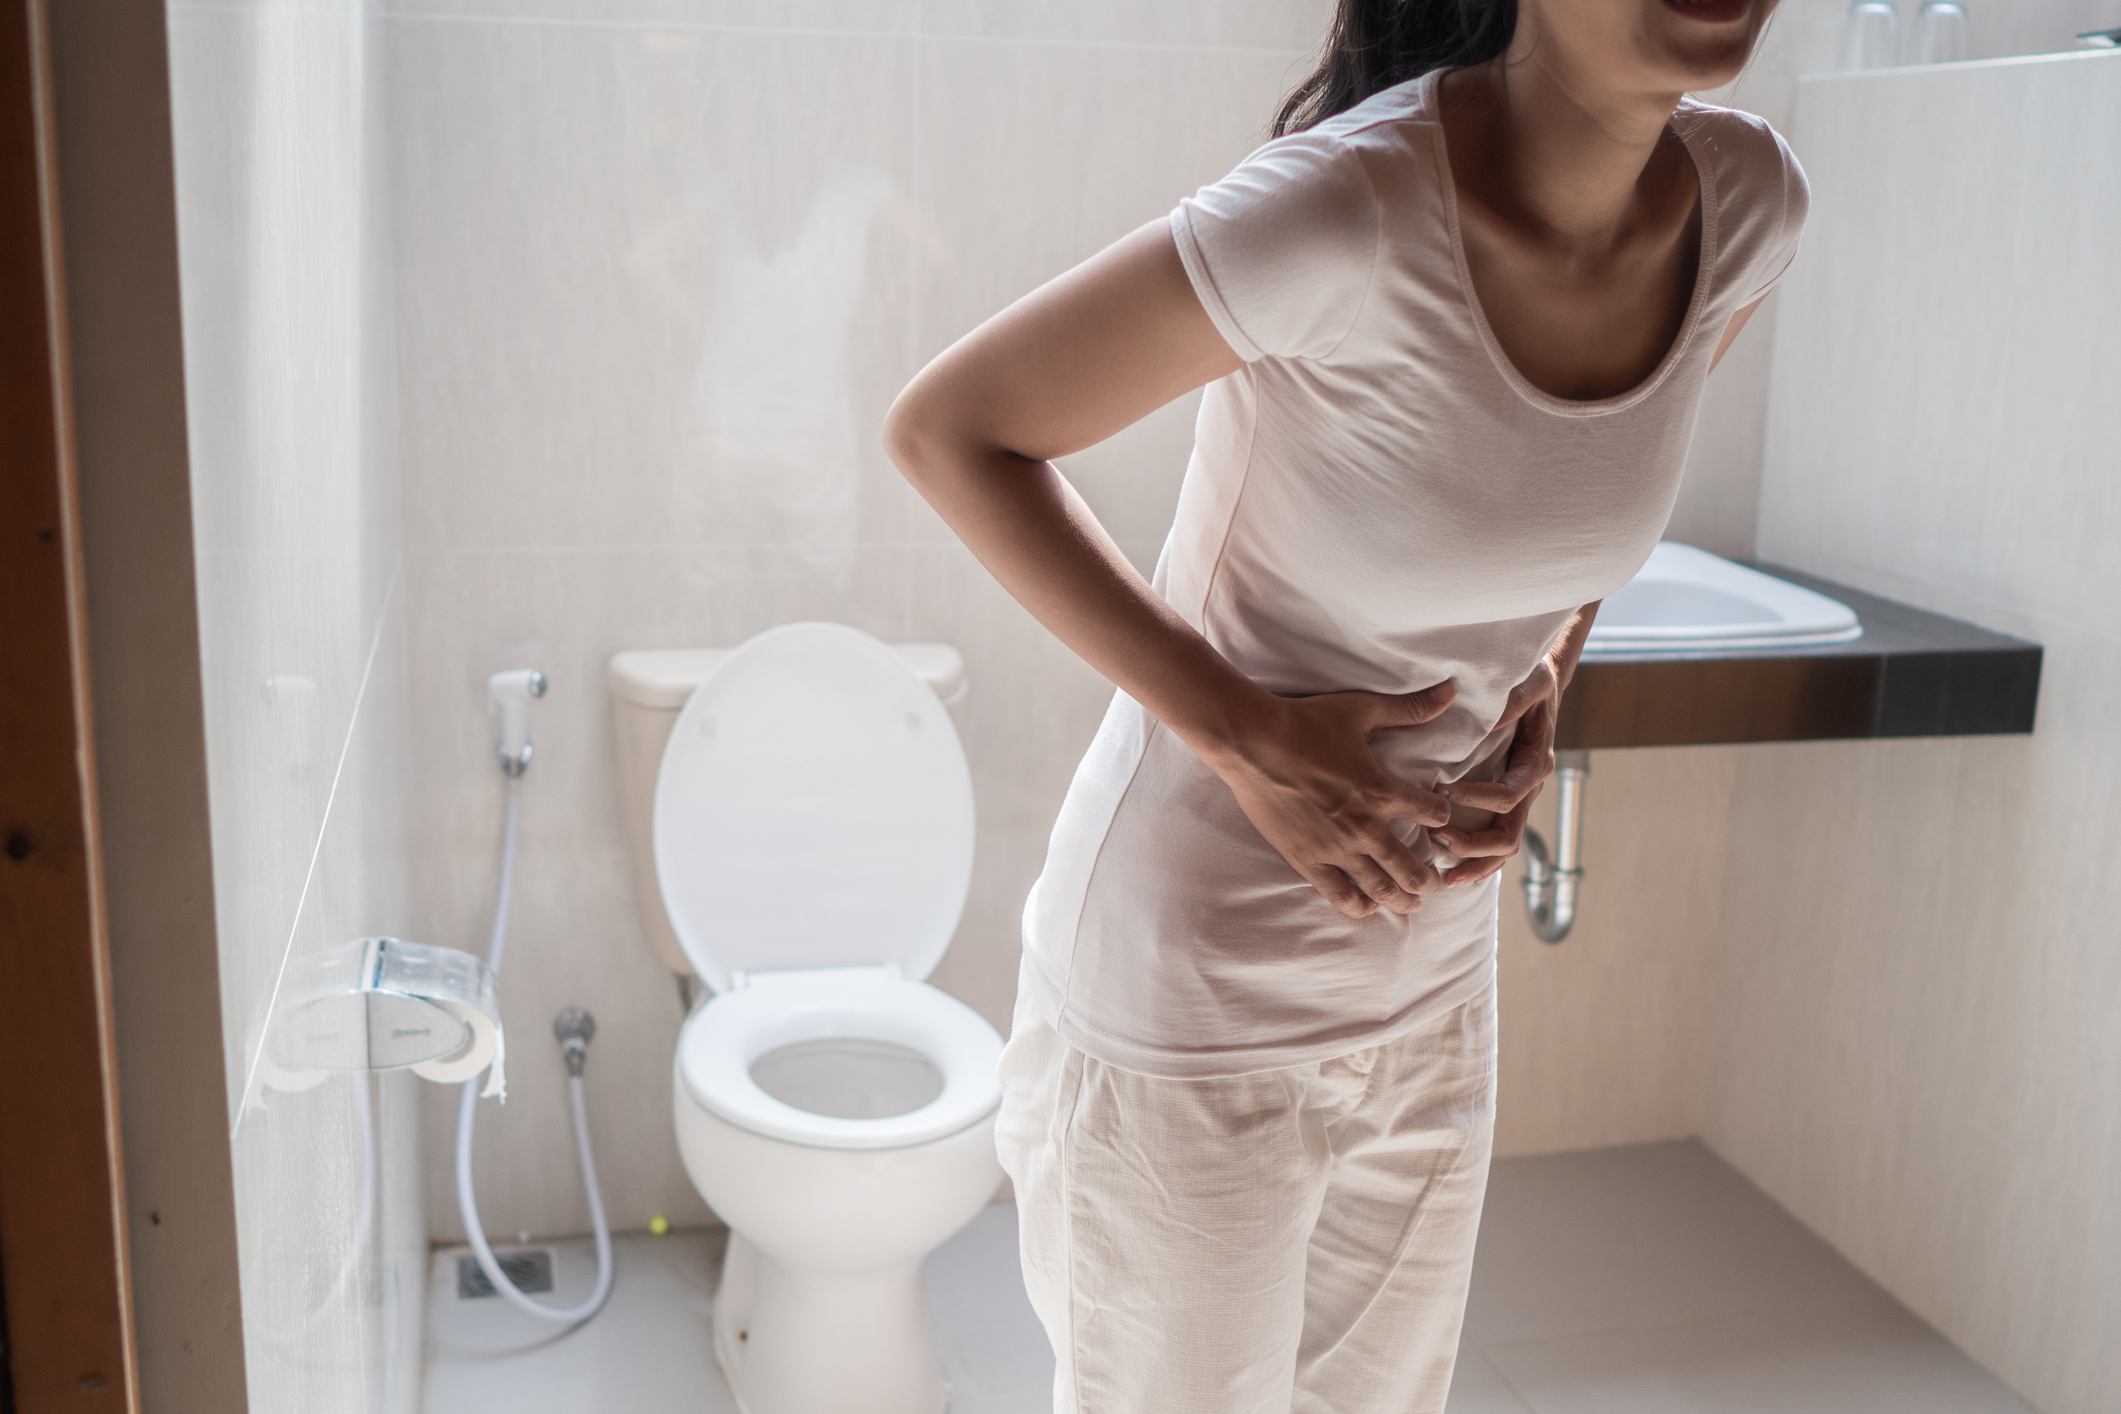 Can PCOS Cause Constipation?